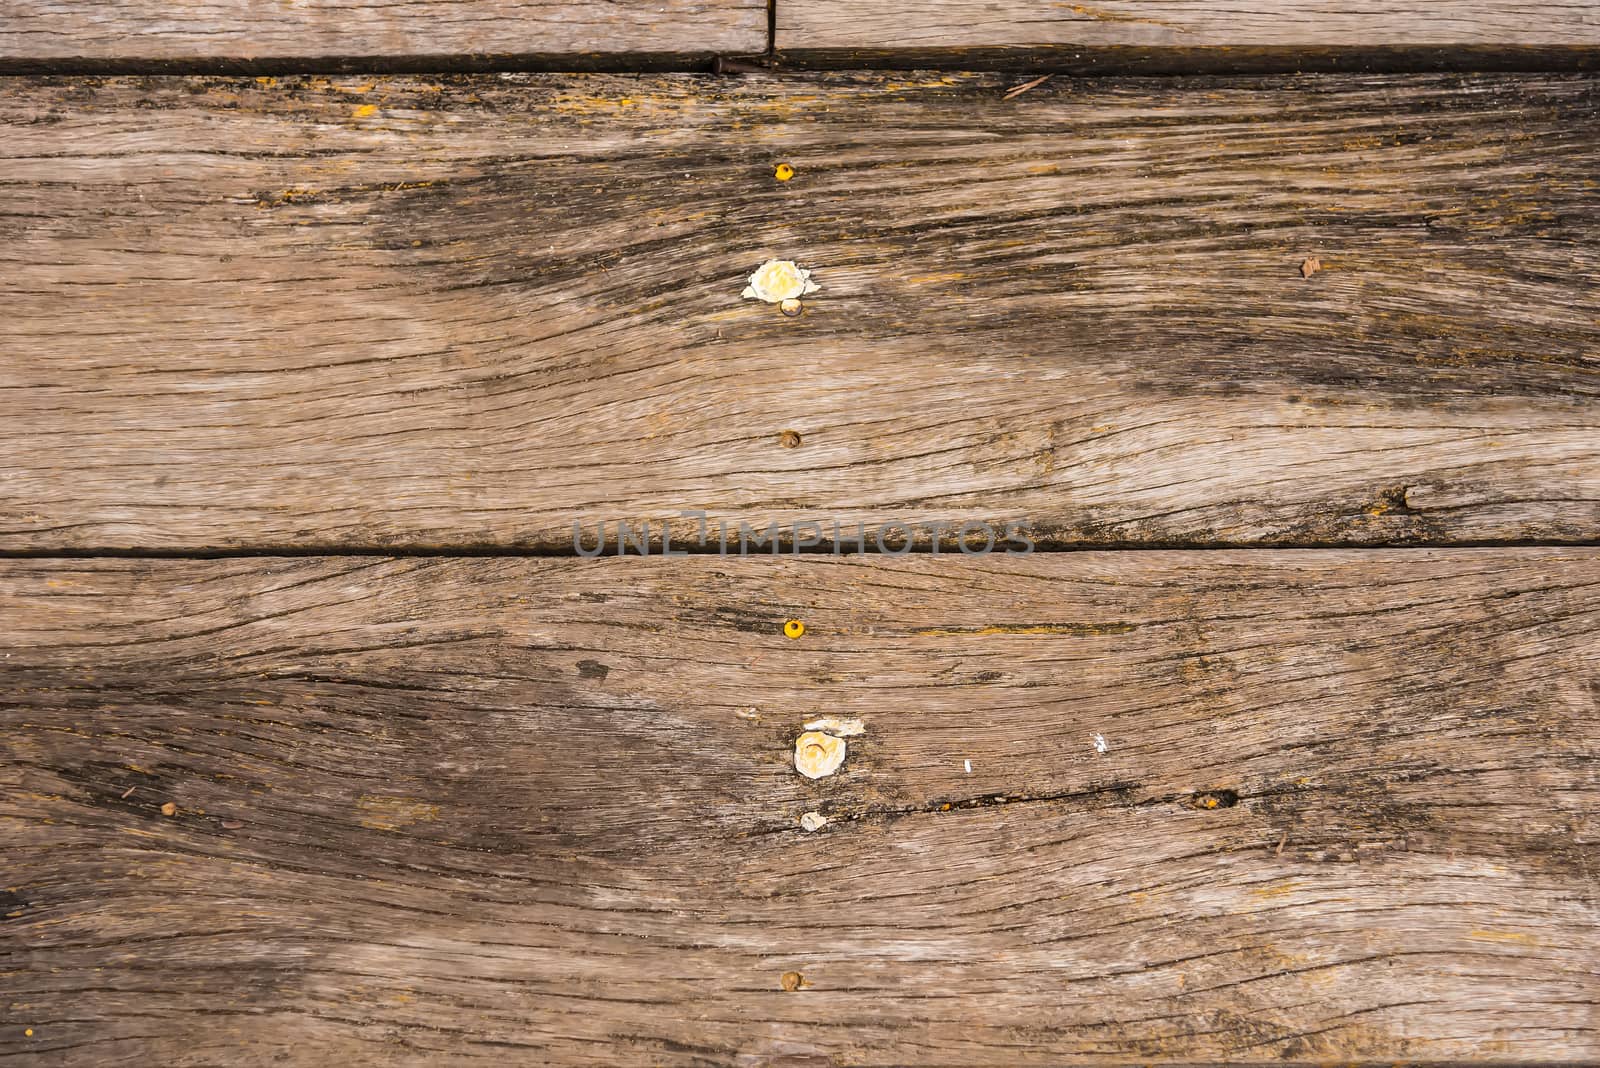 The old wood texture with natural patterns background with rusty by Bubbers